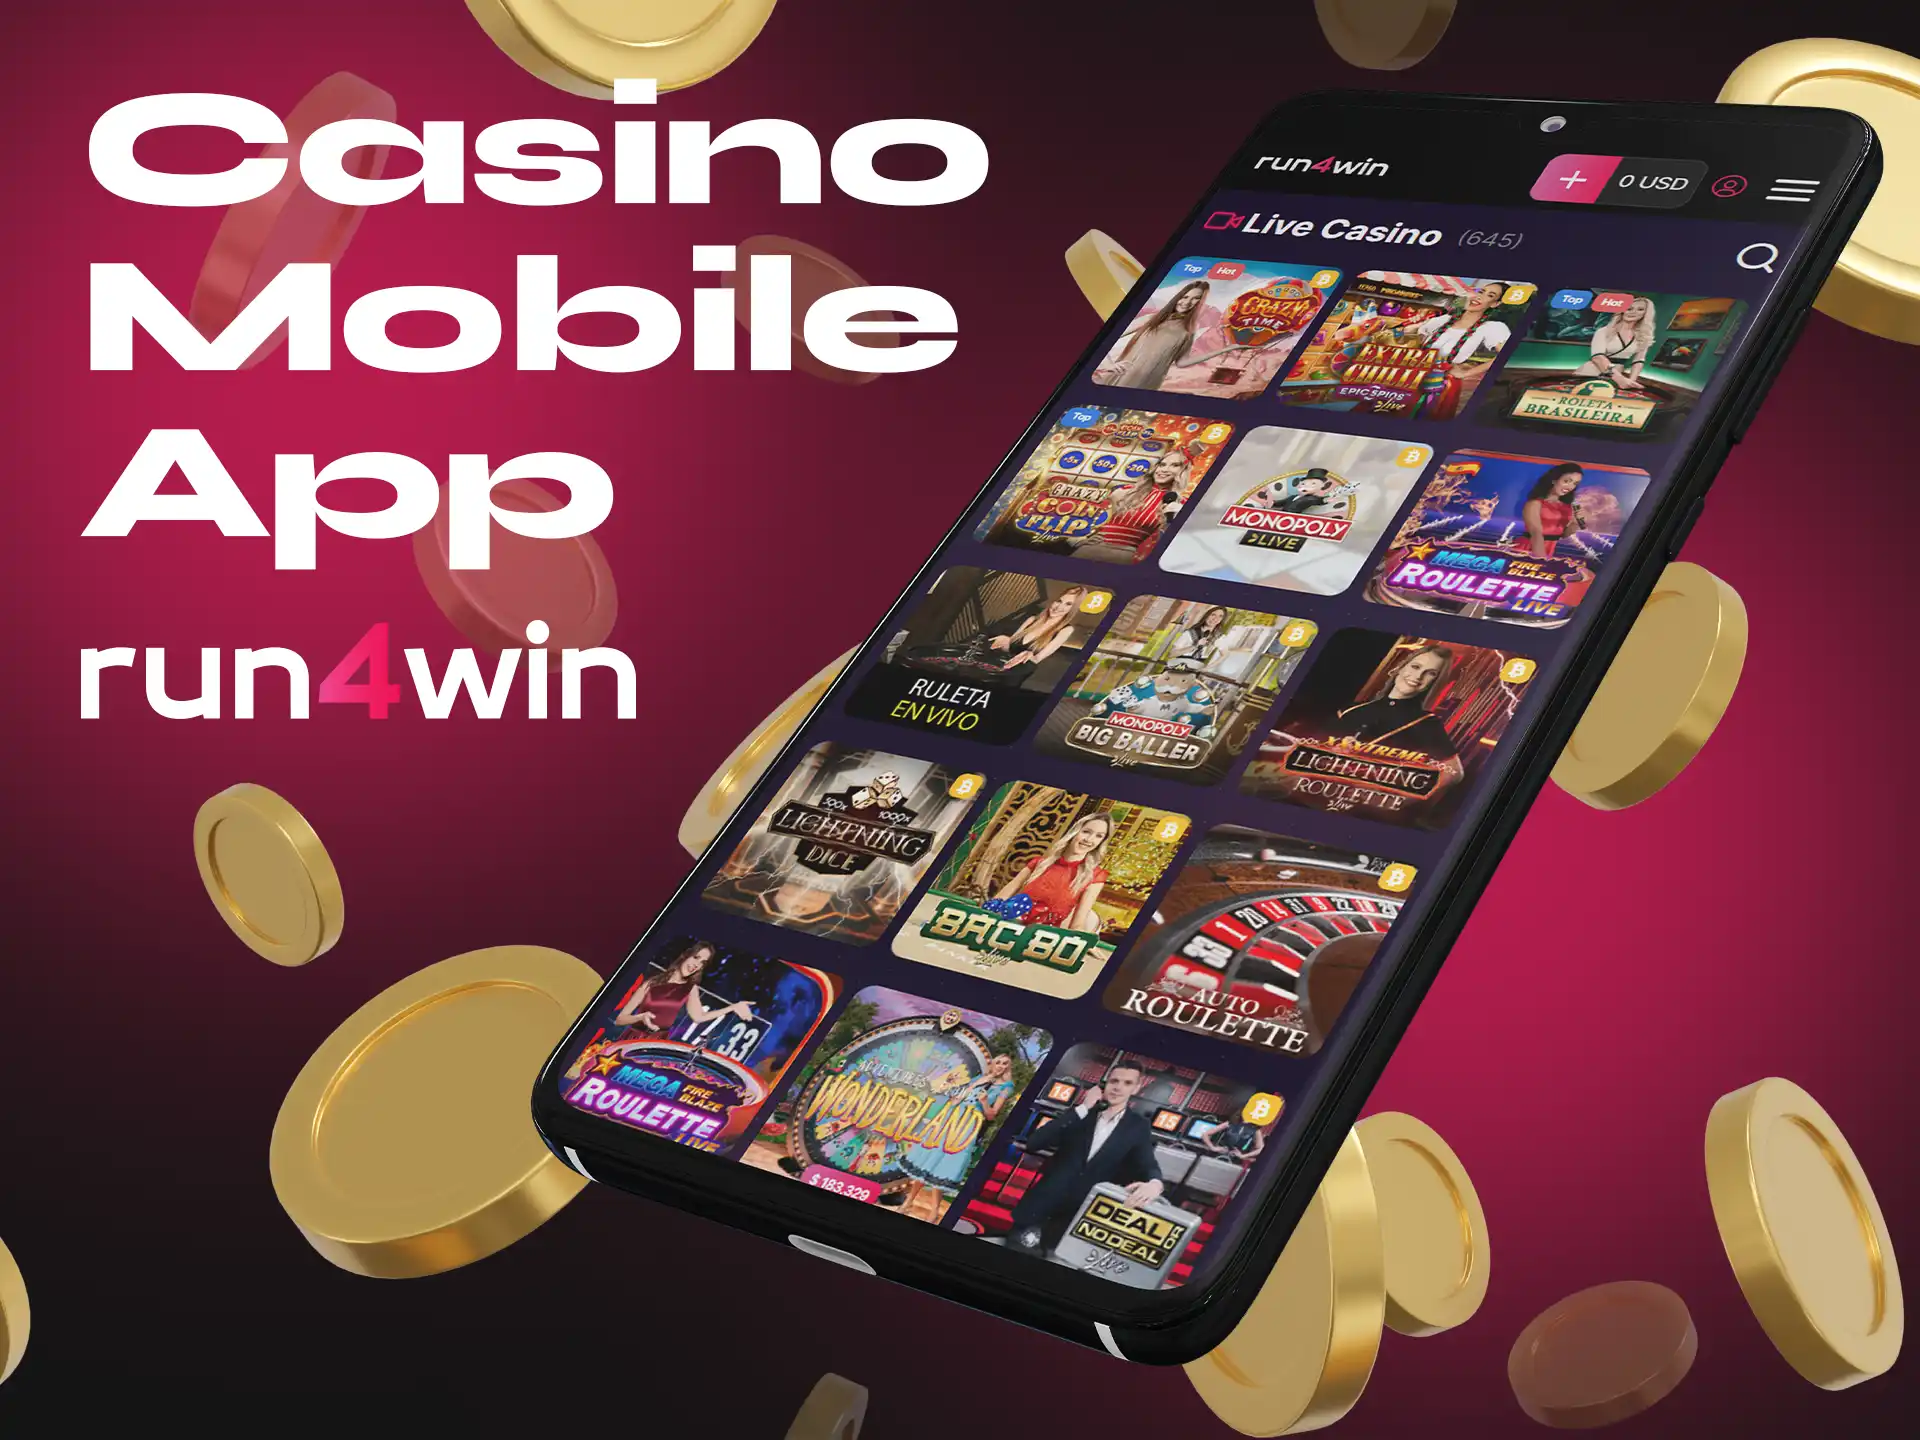 You can play at Run4Win Casino through the browser on your iOS or Android device.